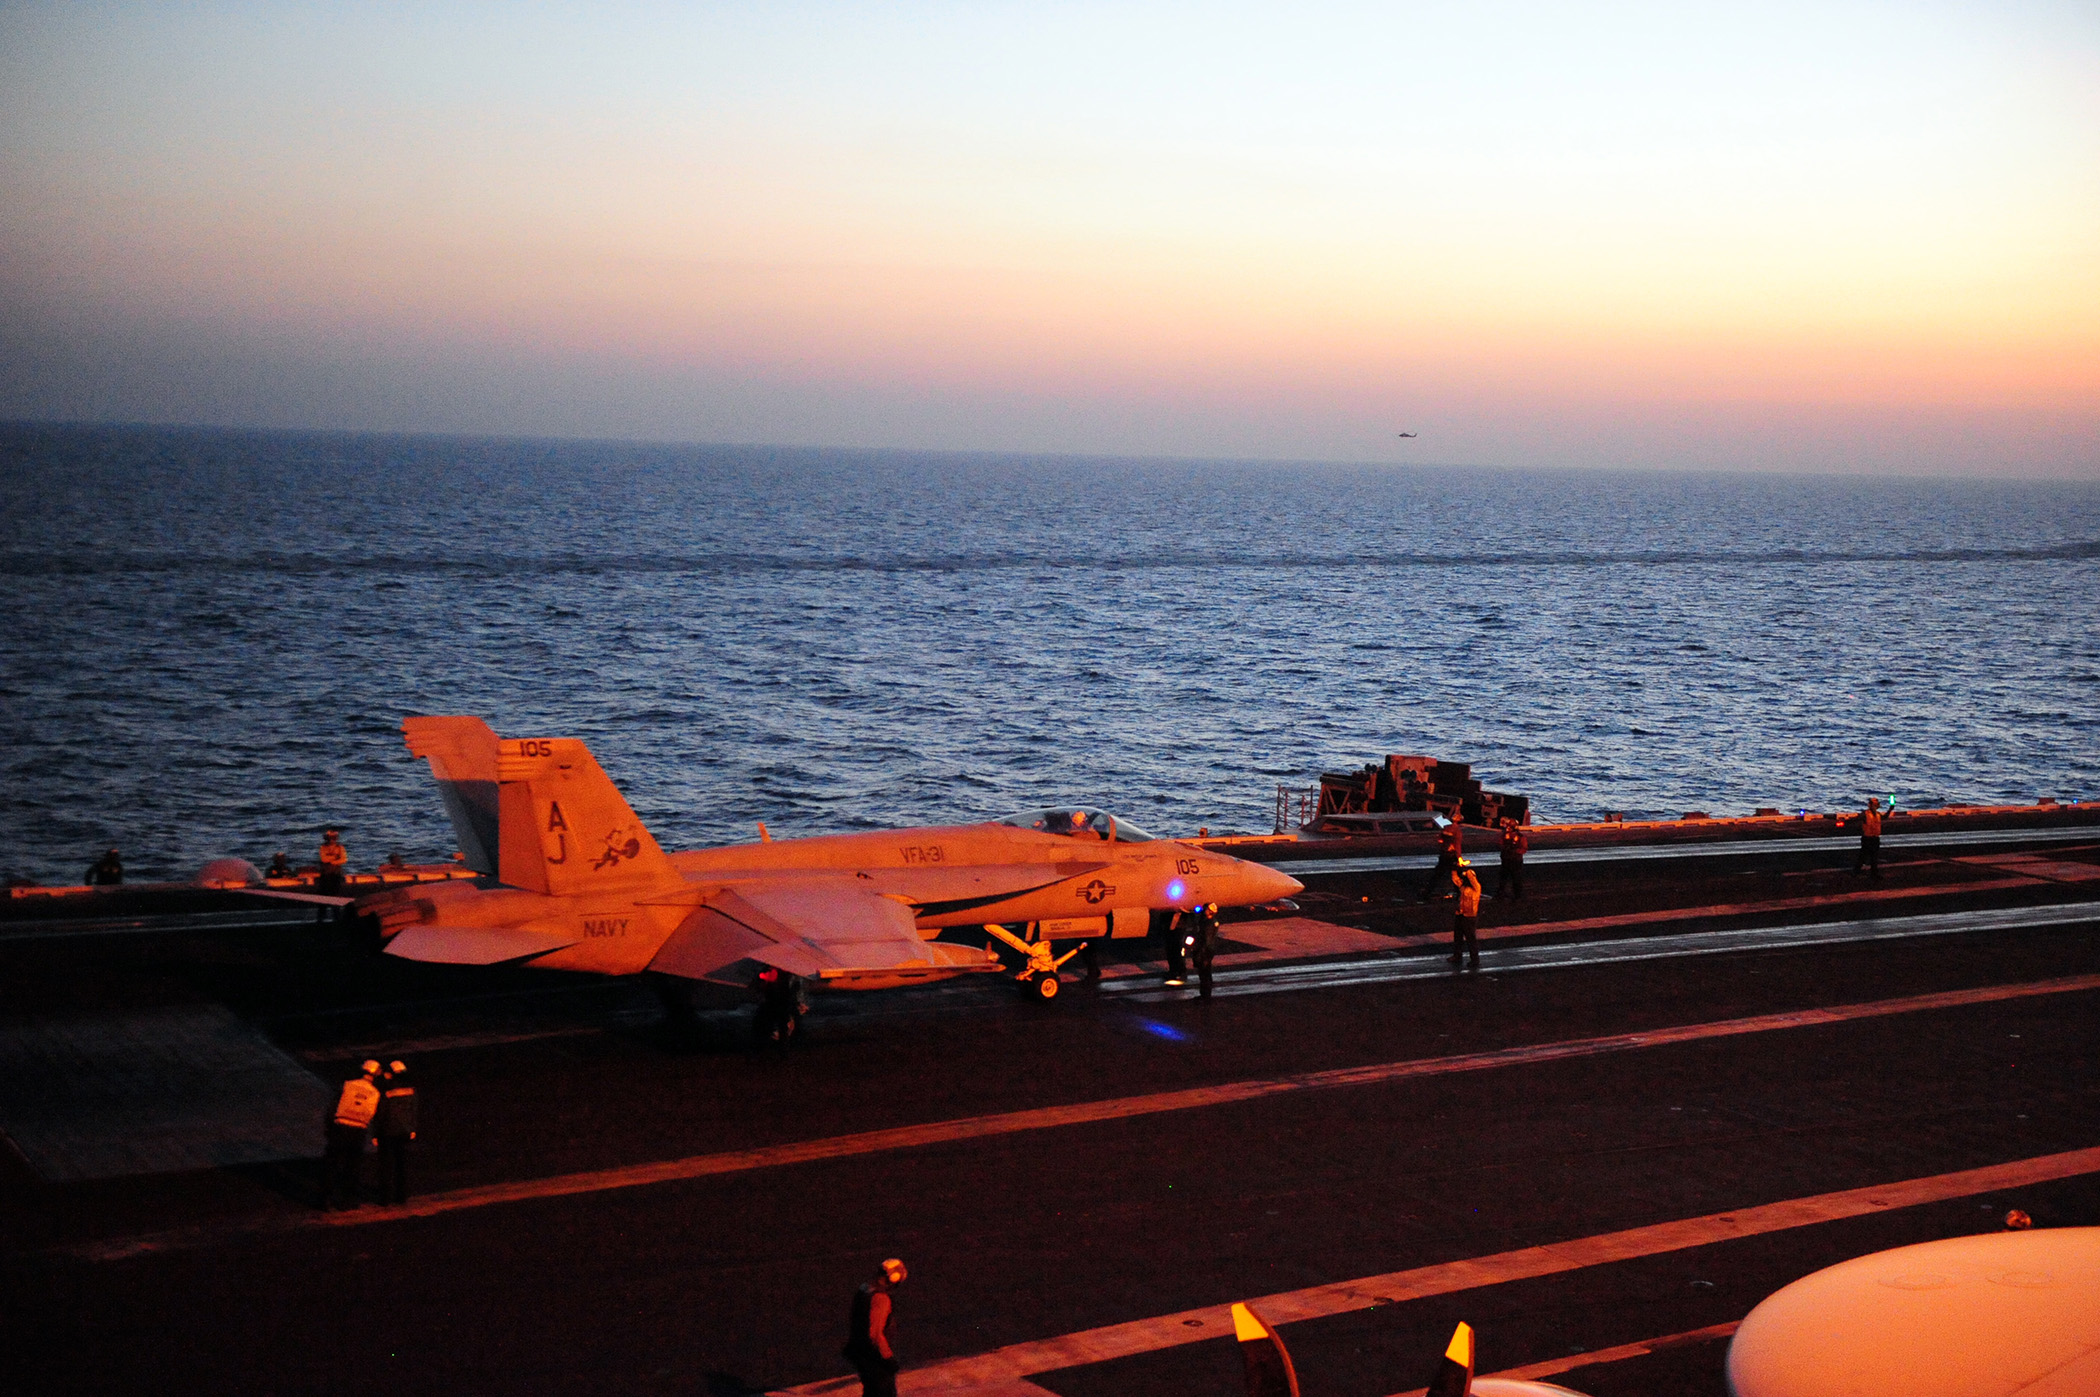 An F/A-18E Super Hornet prepares to launch from the aircraft carrier USS George H.W. Bush (CVN-77) on June 15, 2014. US Navy Photo